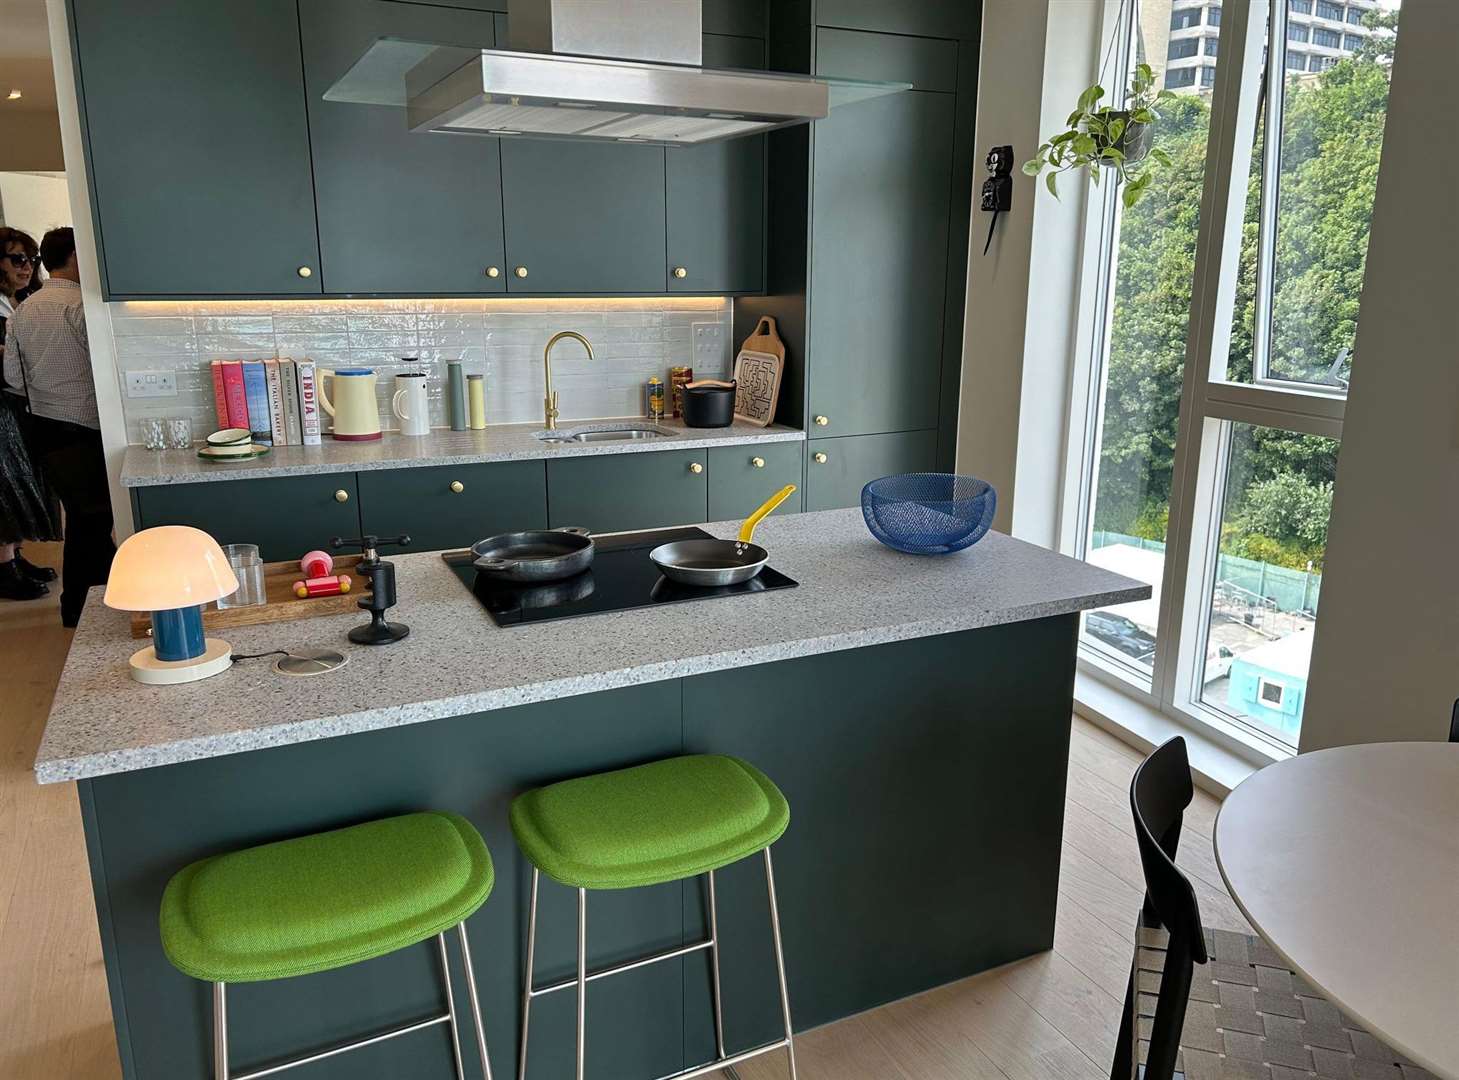 A kitchen inside one of the Shoreline Crescent homes